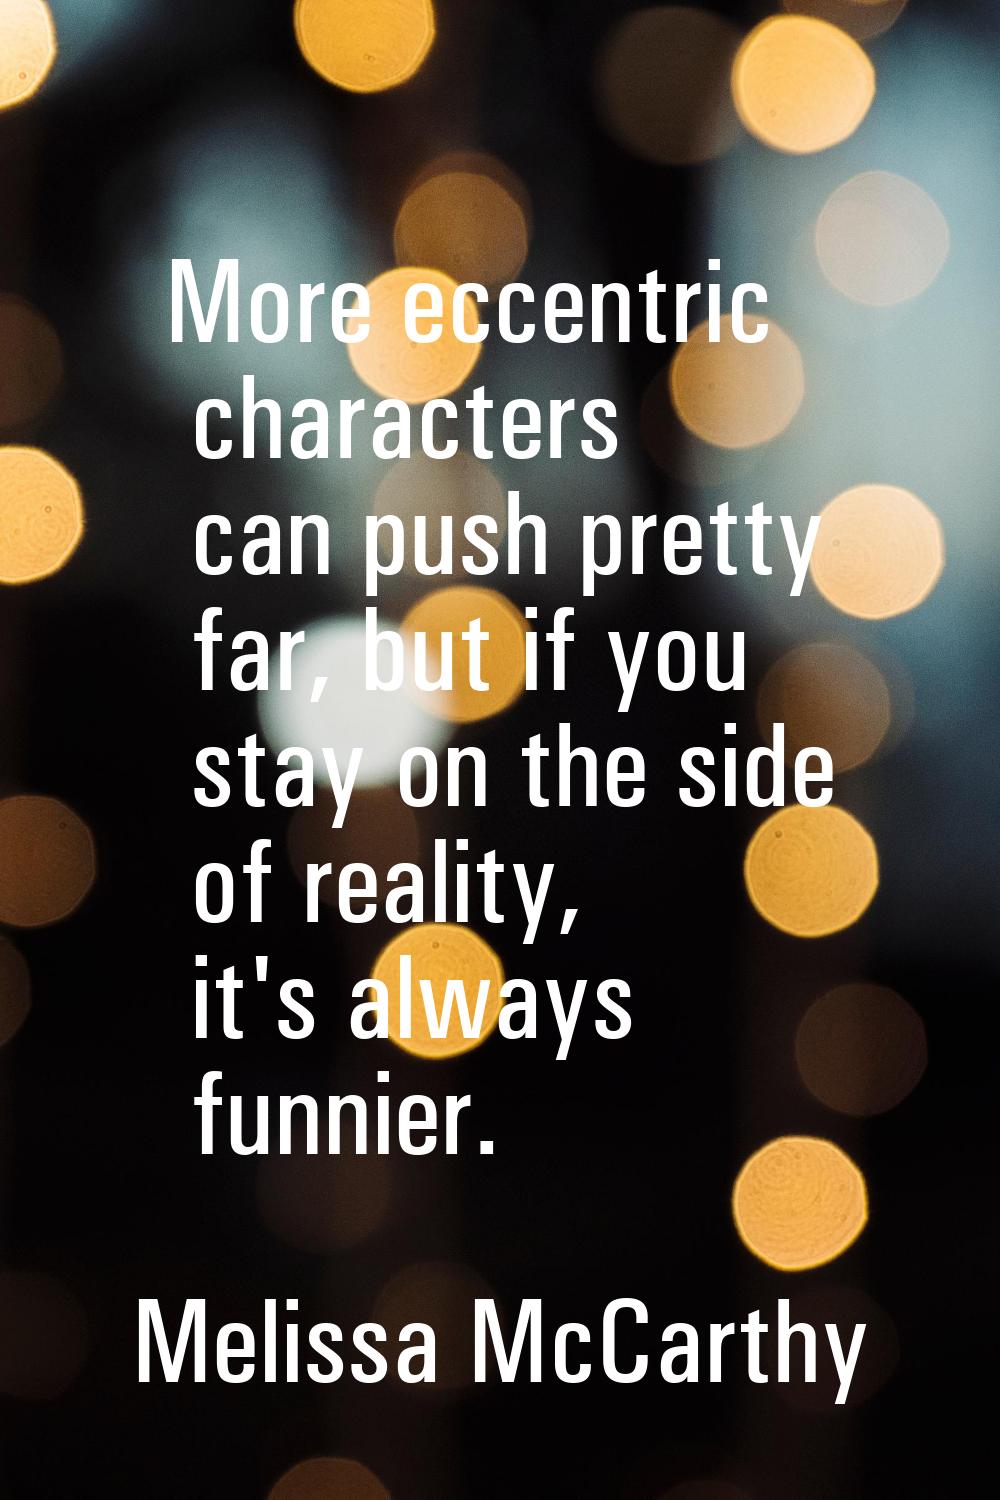 More eccentric characters can push pretty far, but if you stay on the side of reality, it's always 